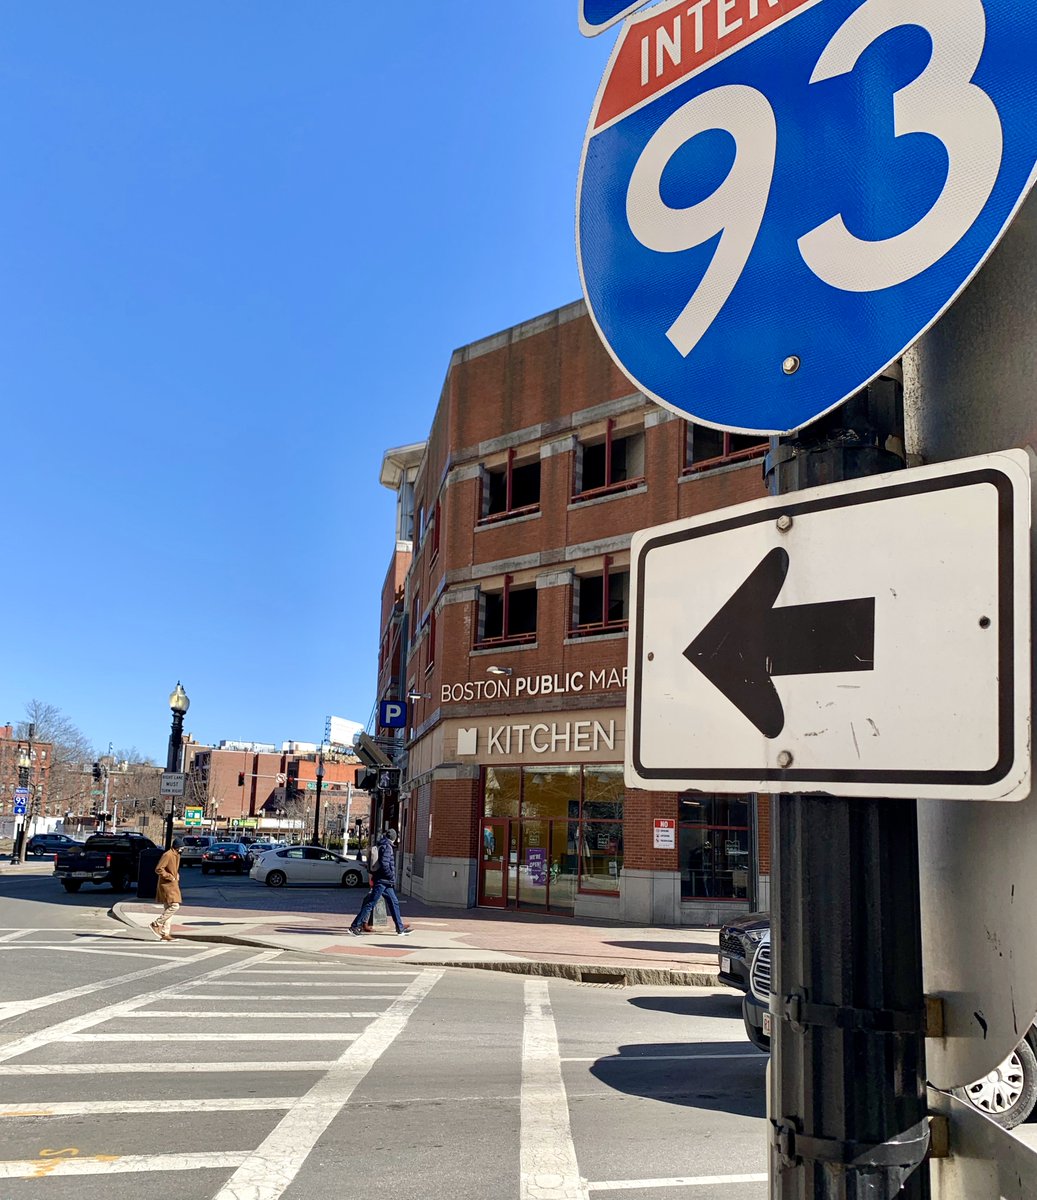 We validate parking for Parcel 7 Haymarket Garage!🚙$3 for up to 3 hours (yes, you read that right - the best deal in Boston!). Entrance is on Sudbury Street between Congress & Surface Road. Ask a vendor to stamp your ticket after a purchase of any amount!